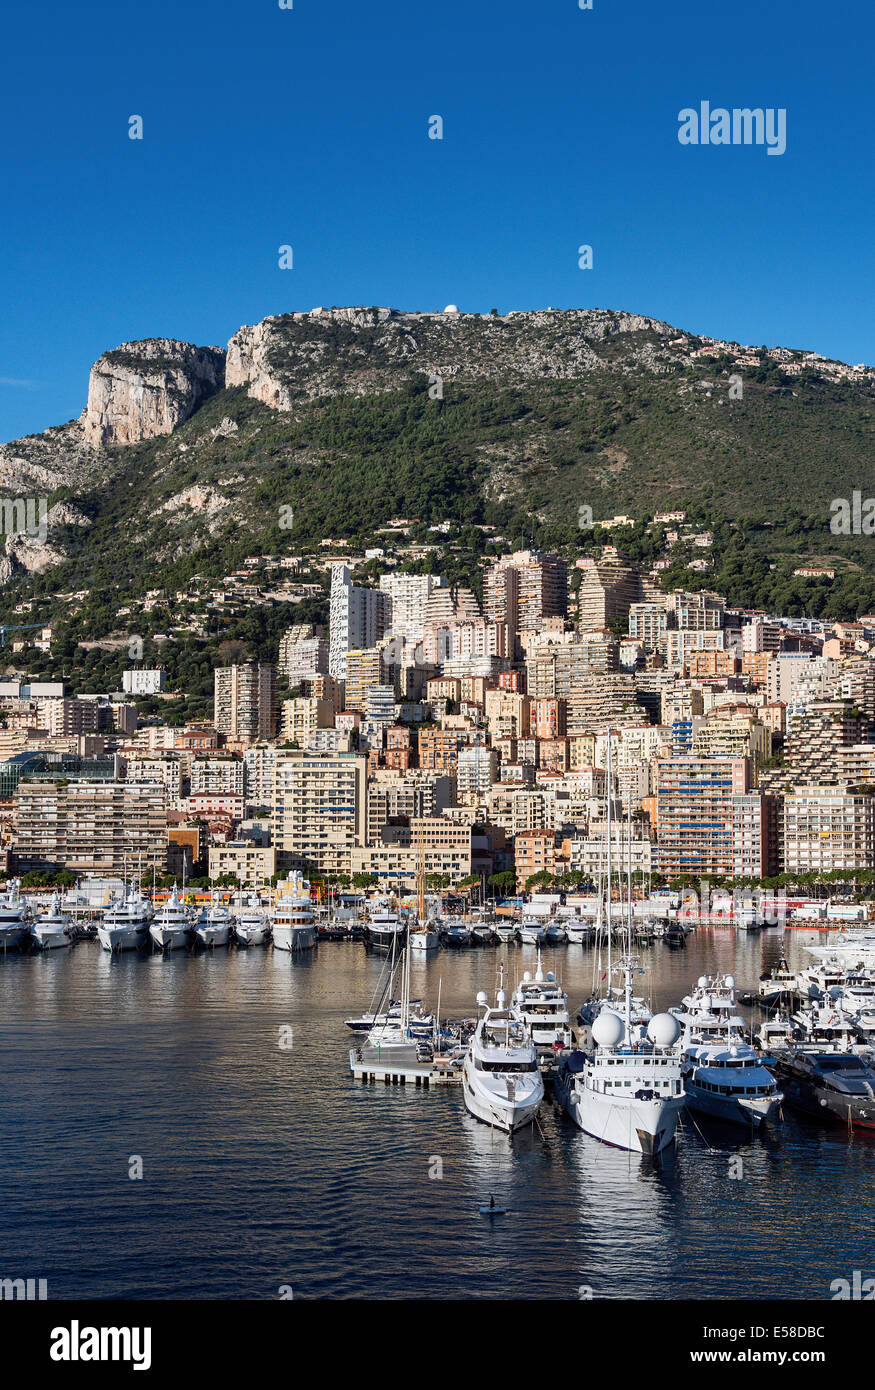 View of Fontvieille and harbor yachts, Monaco Stock Photo